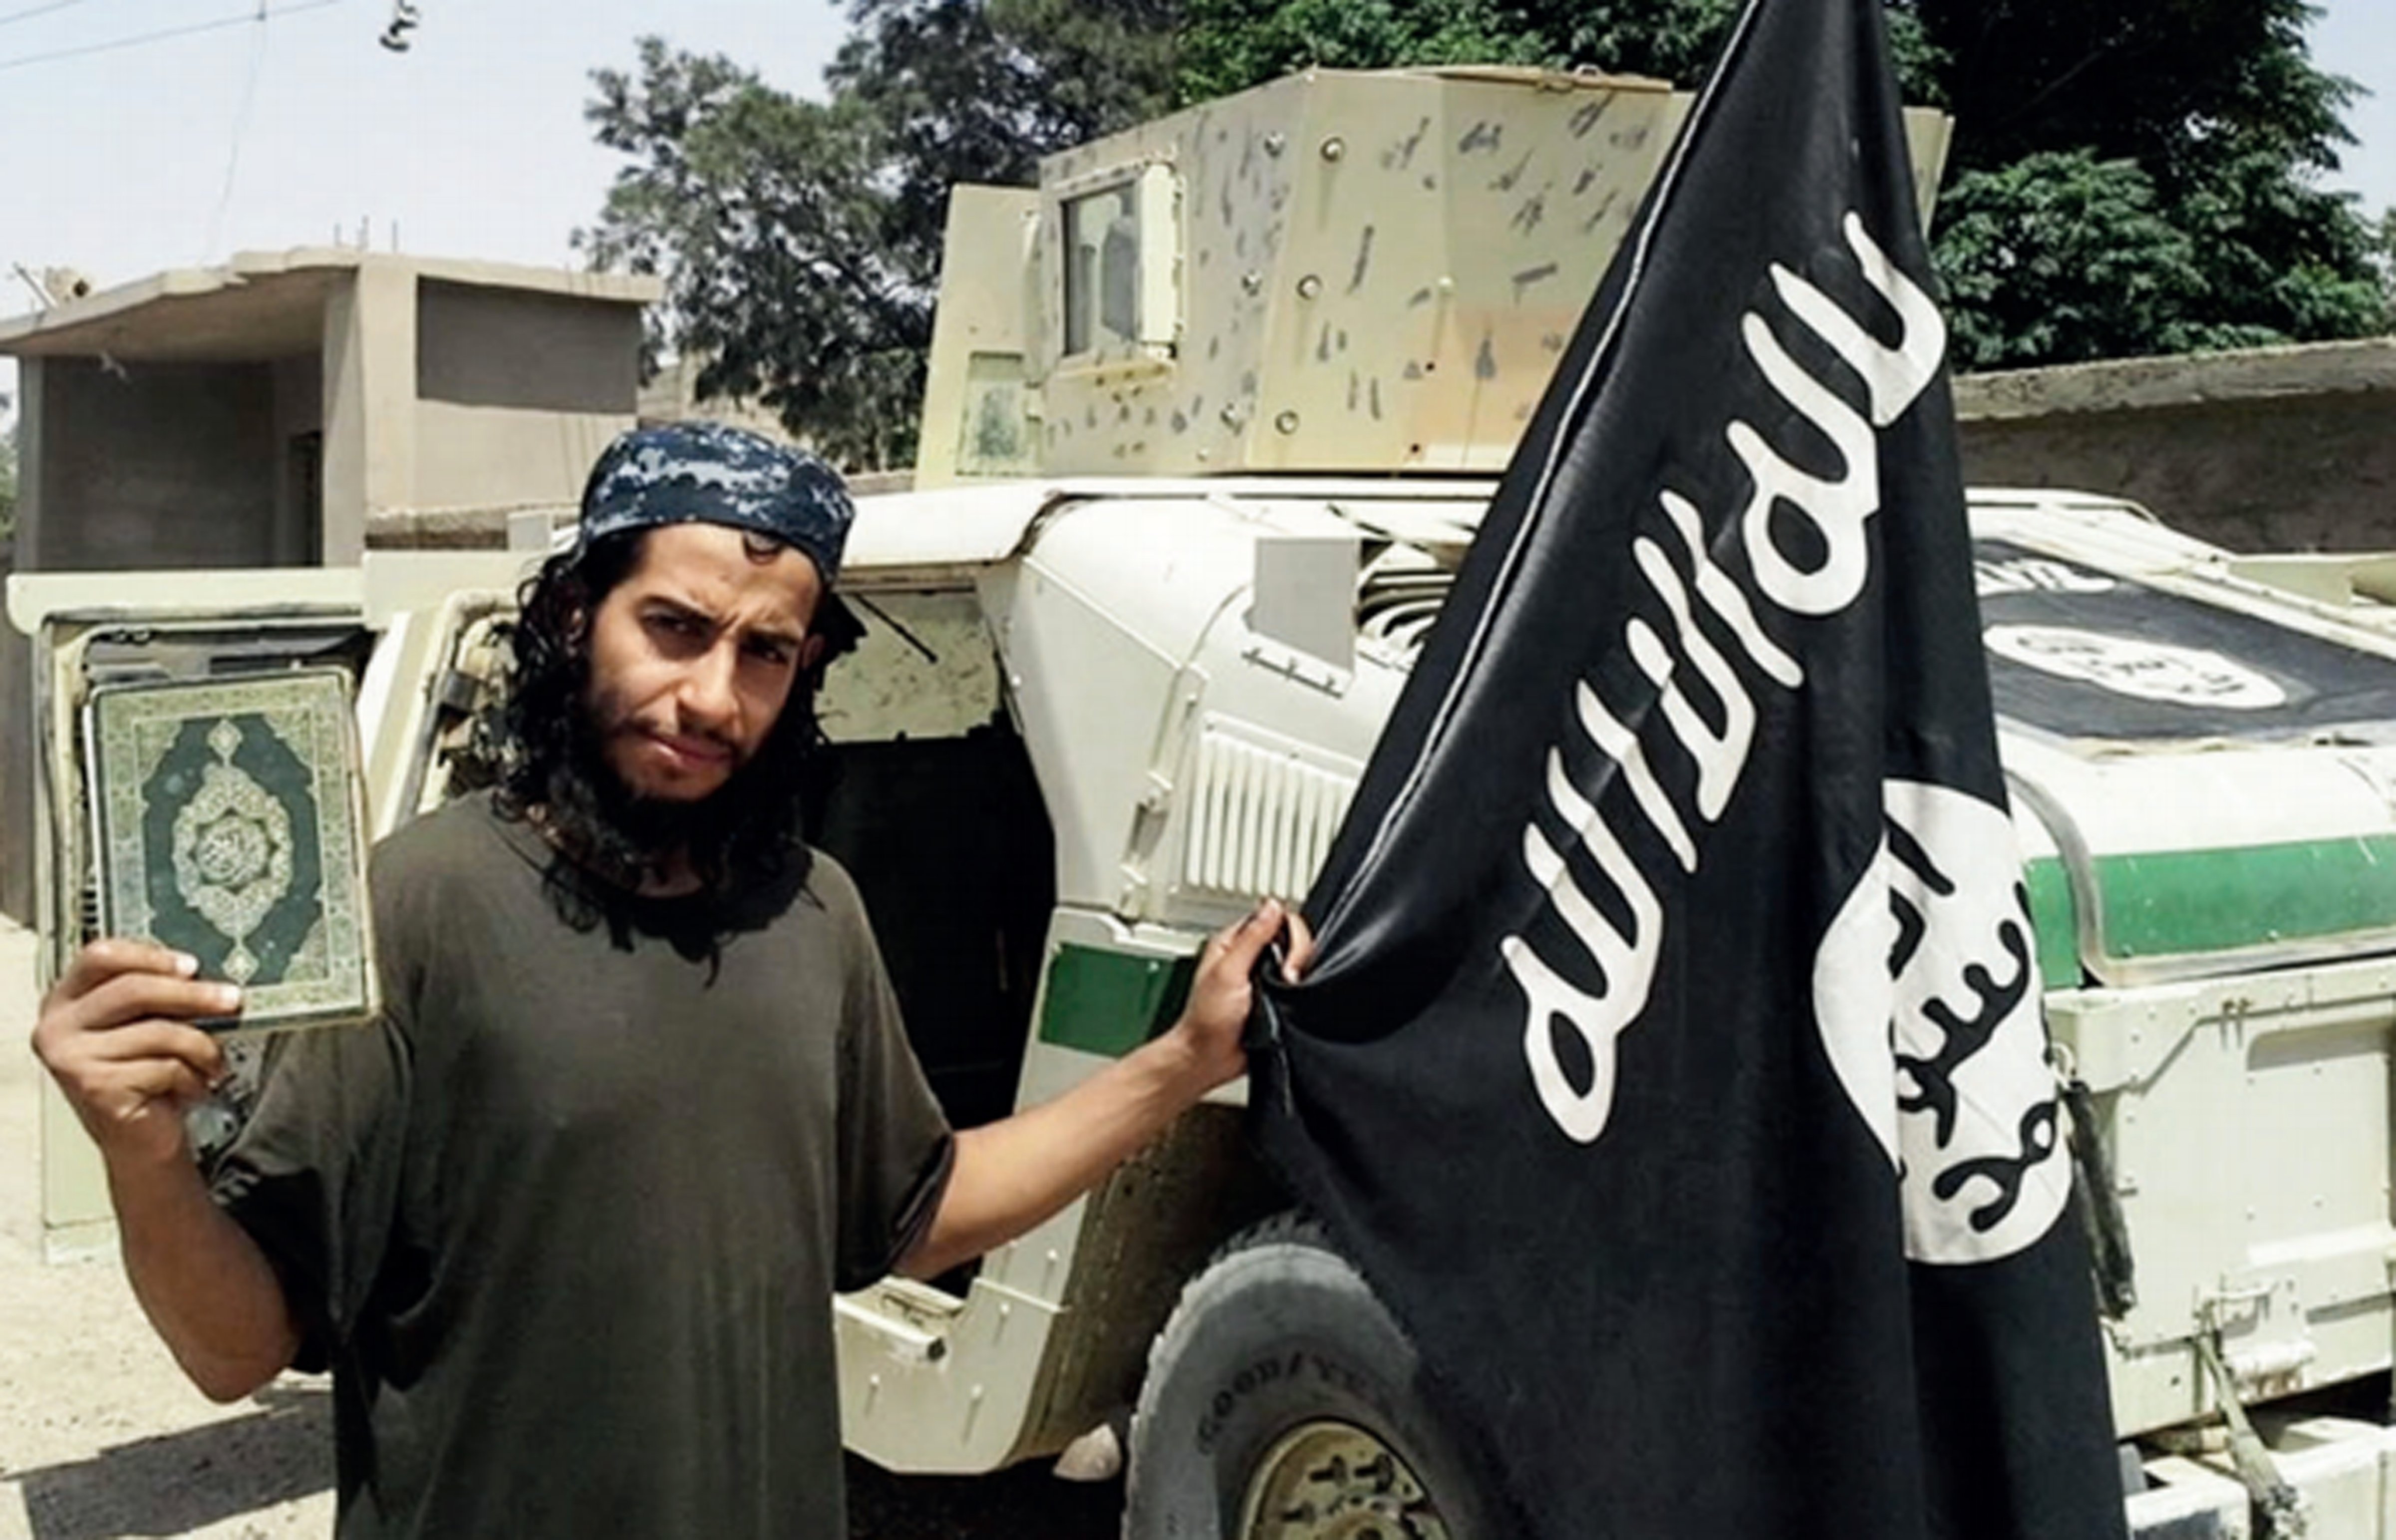 An undated image, which was obtained by the Associated Press from Islamic State's English-language magazine Dabiq, shows Abdelhamid Abaaoud. (Militant Publication via Associated Press)